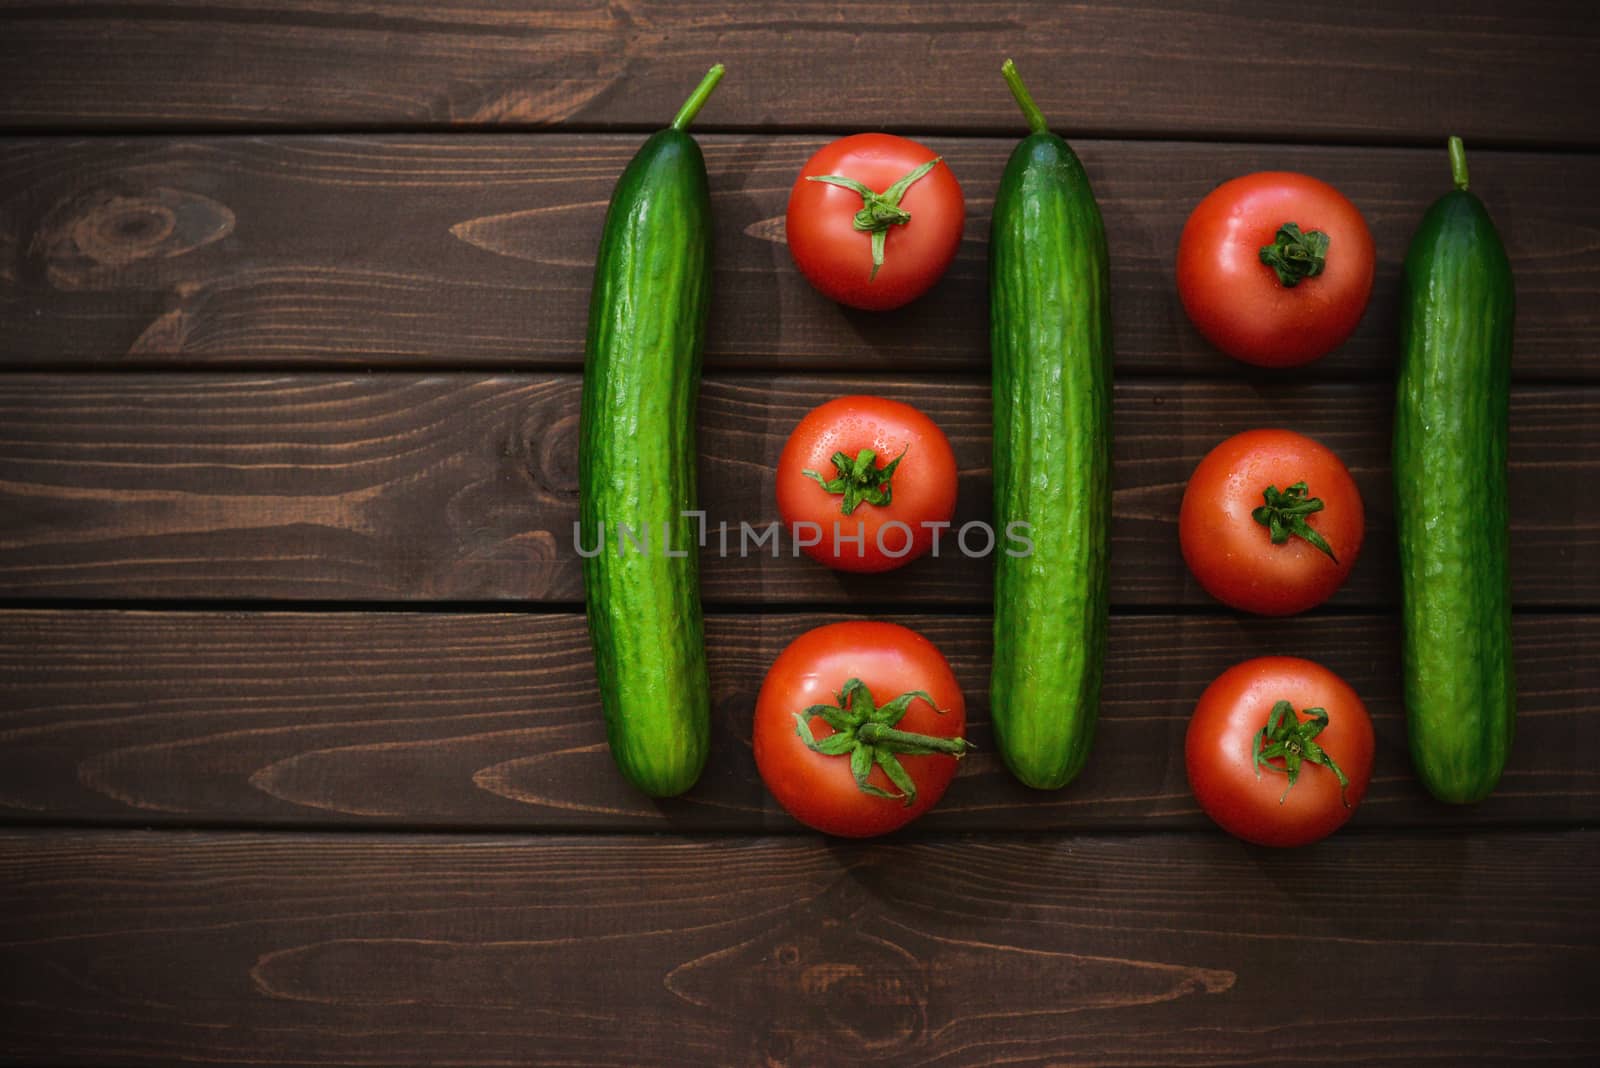 Tomatoes and cucumbers, the best traditional vegetables with low caloric content for ease and health of your organism.